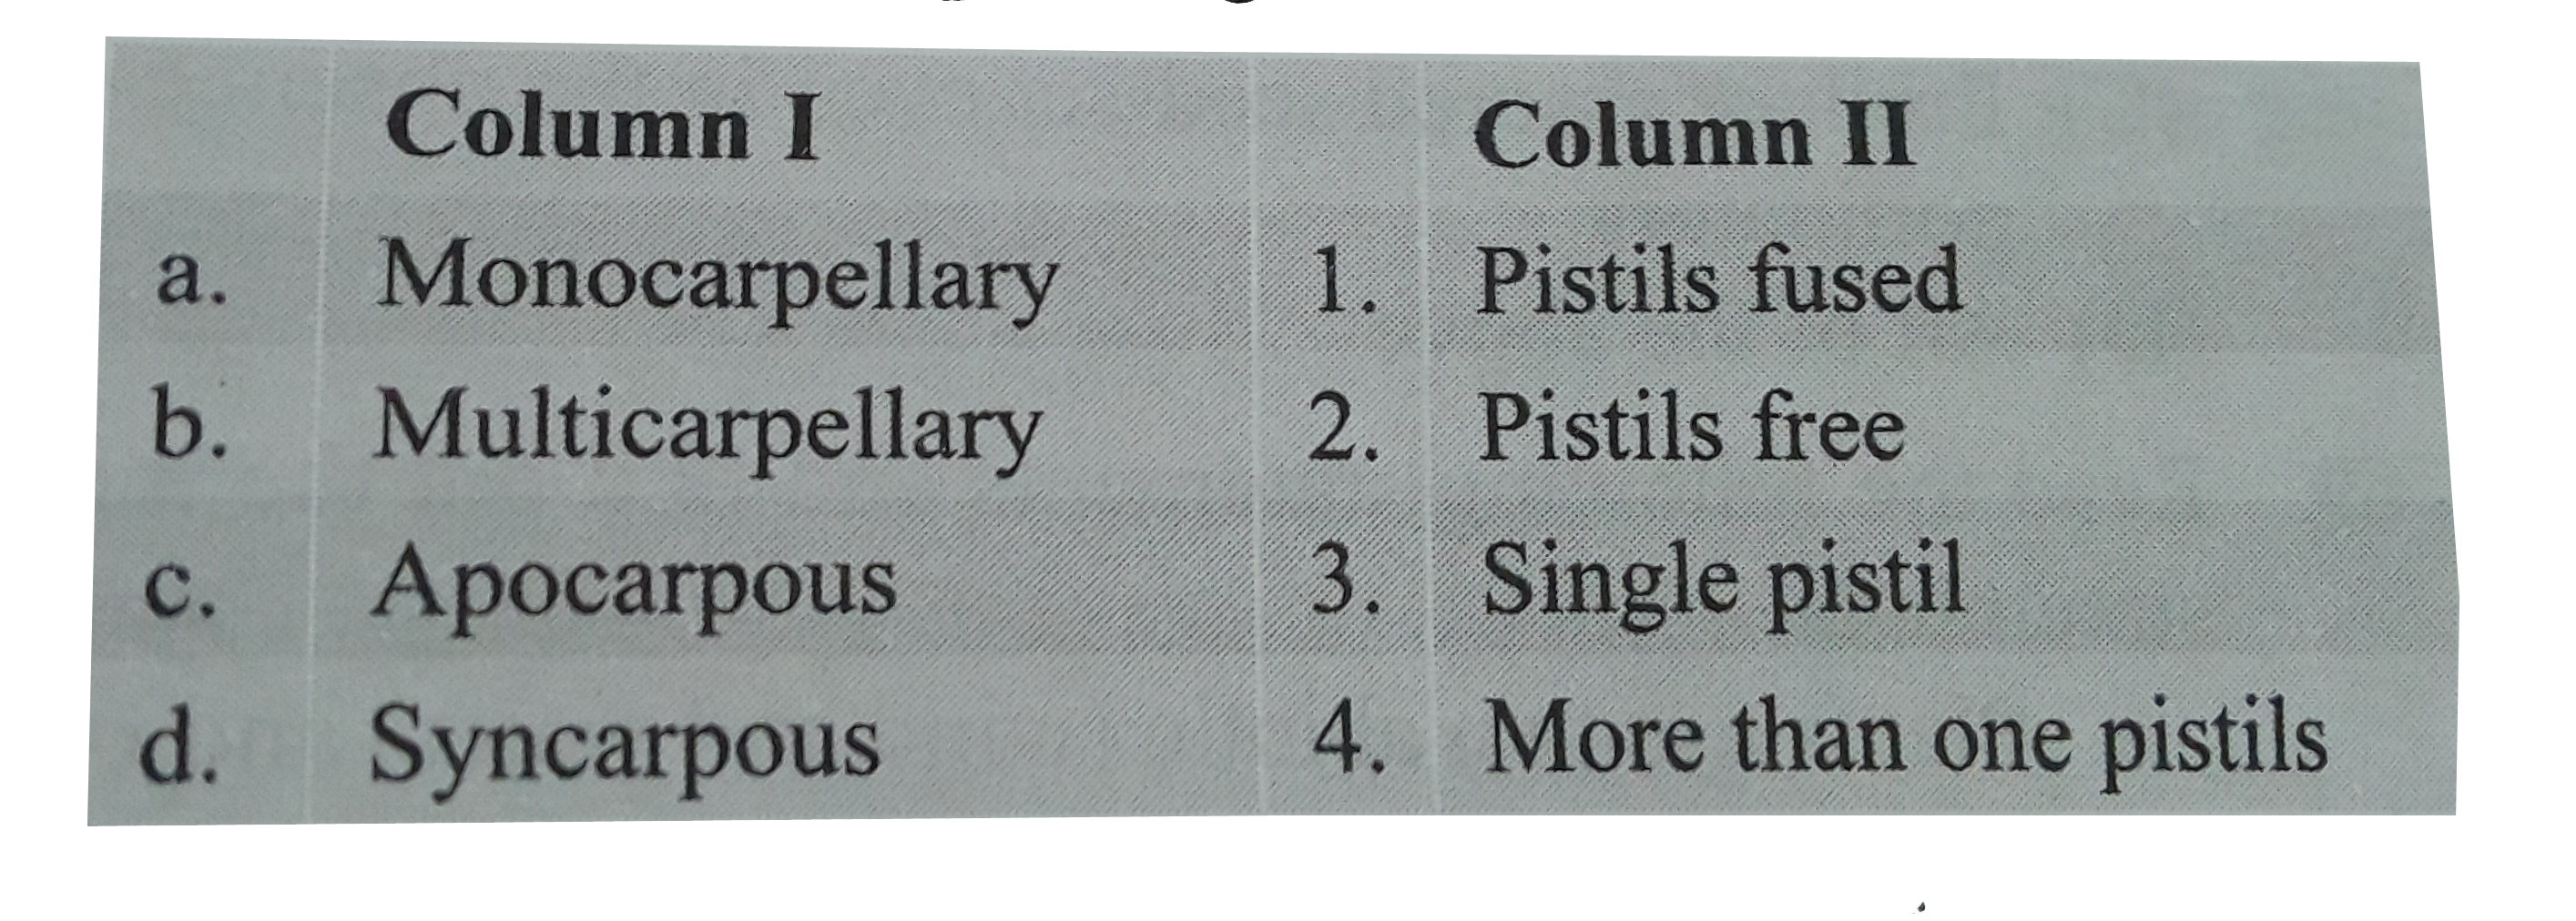 Match the columns I and II, and choose that correct combination from the options given.